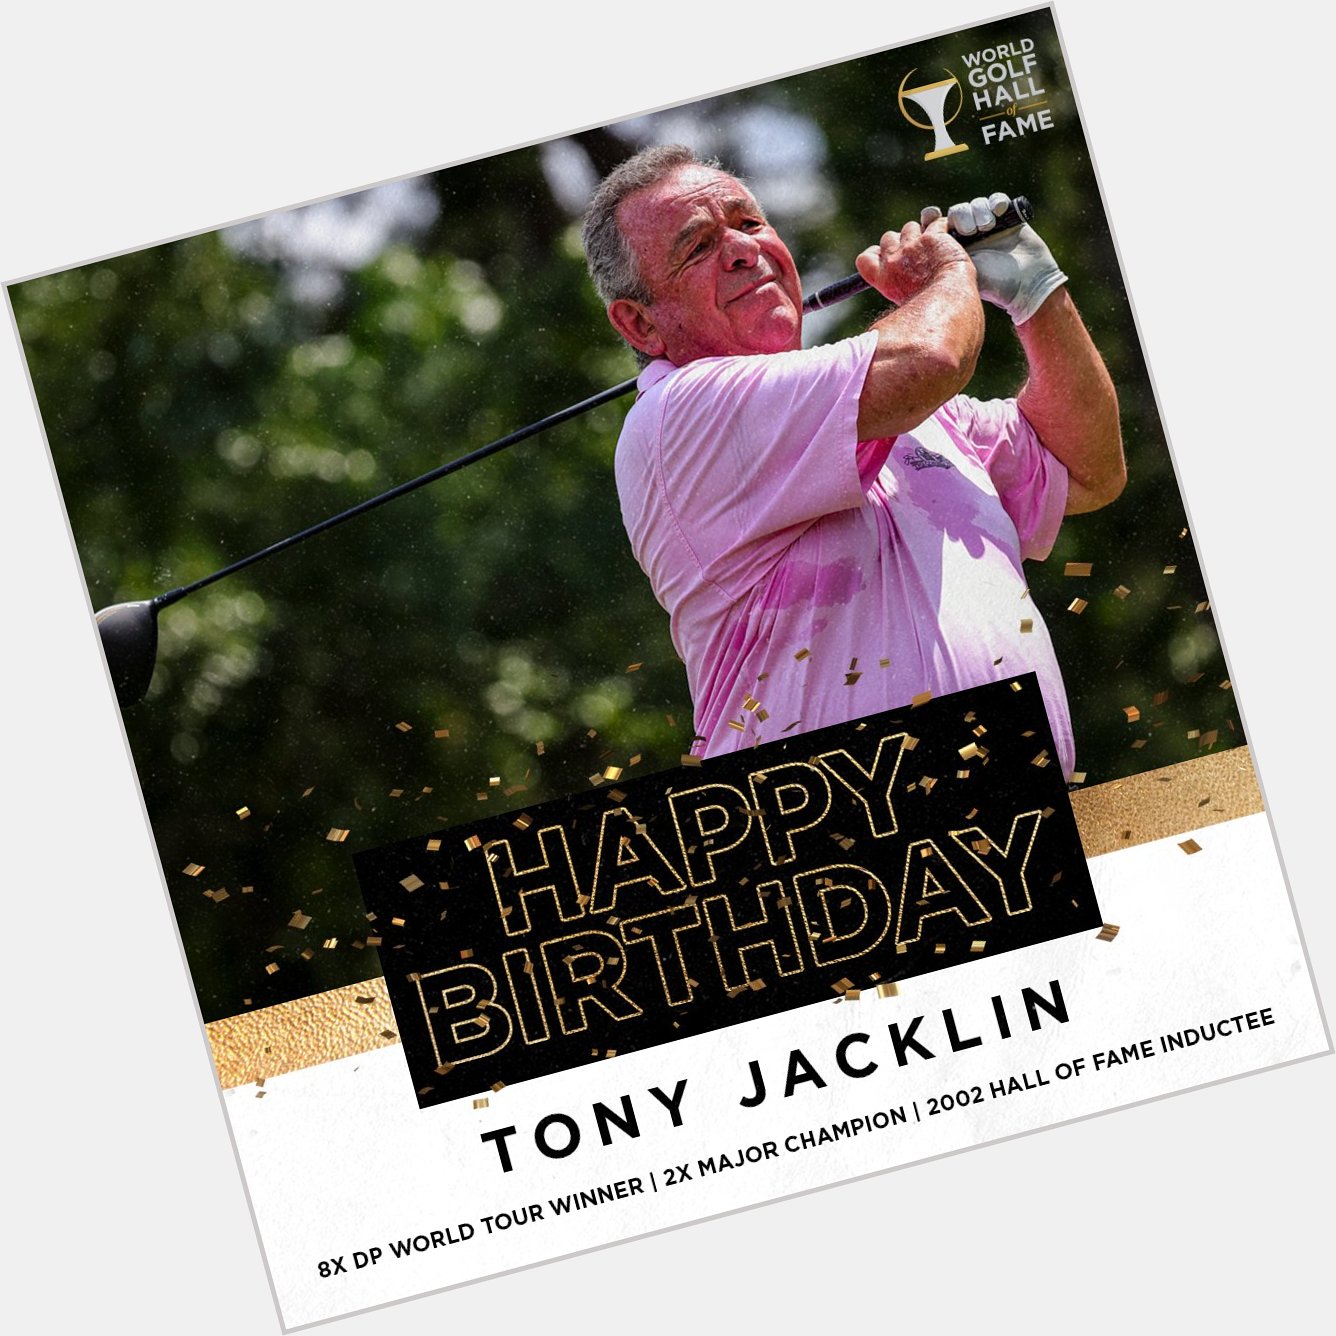 Wishing a happy birthday to eight-time winner, two-time major champion and 2002 inductee, Tony Jacklin. 